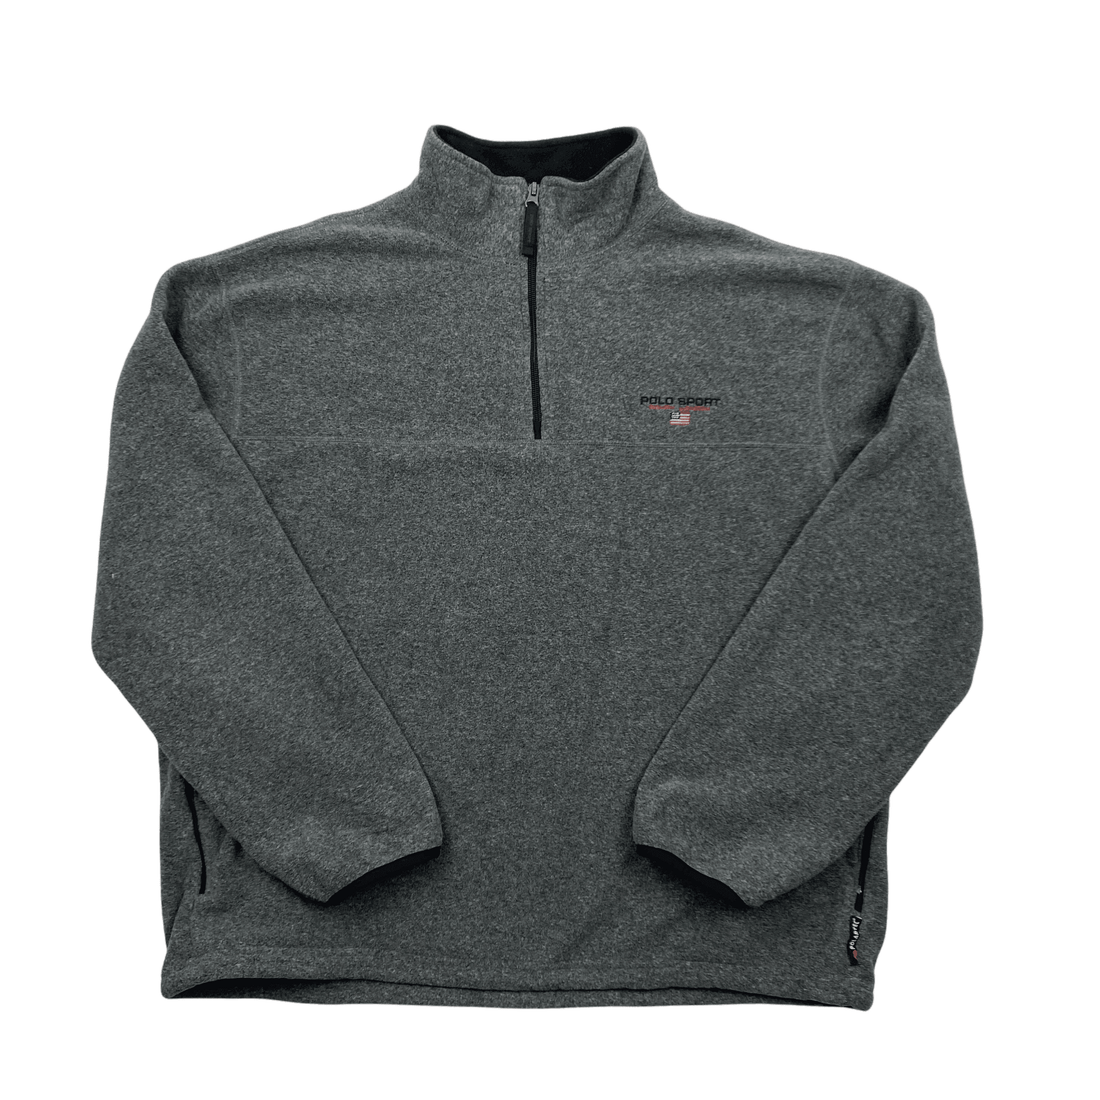 Vintage 90s Grey Ralph Lauren Polo Sport Spell-Out Quarter Zip Fleece - XXL (Recommended Size - Extra Large) - The Streetwear Studio